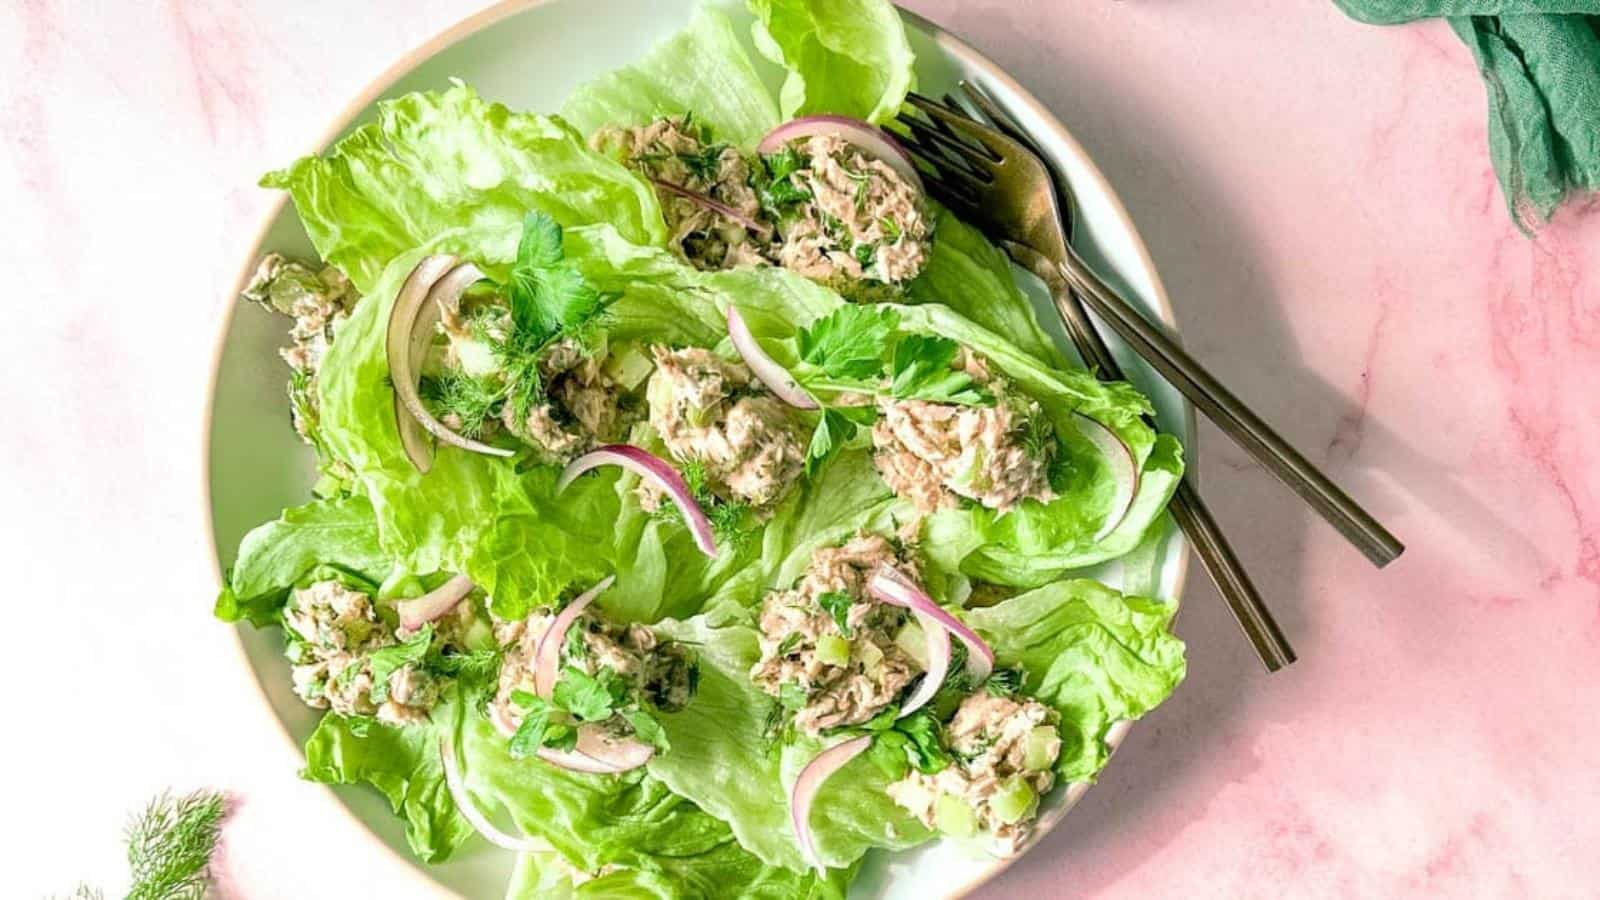 Healthy Tuna salad without mayo sits on a bed of iceberg lettuce surrounded by two forks, dill, and a green linen.